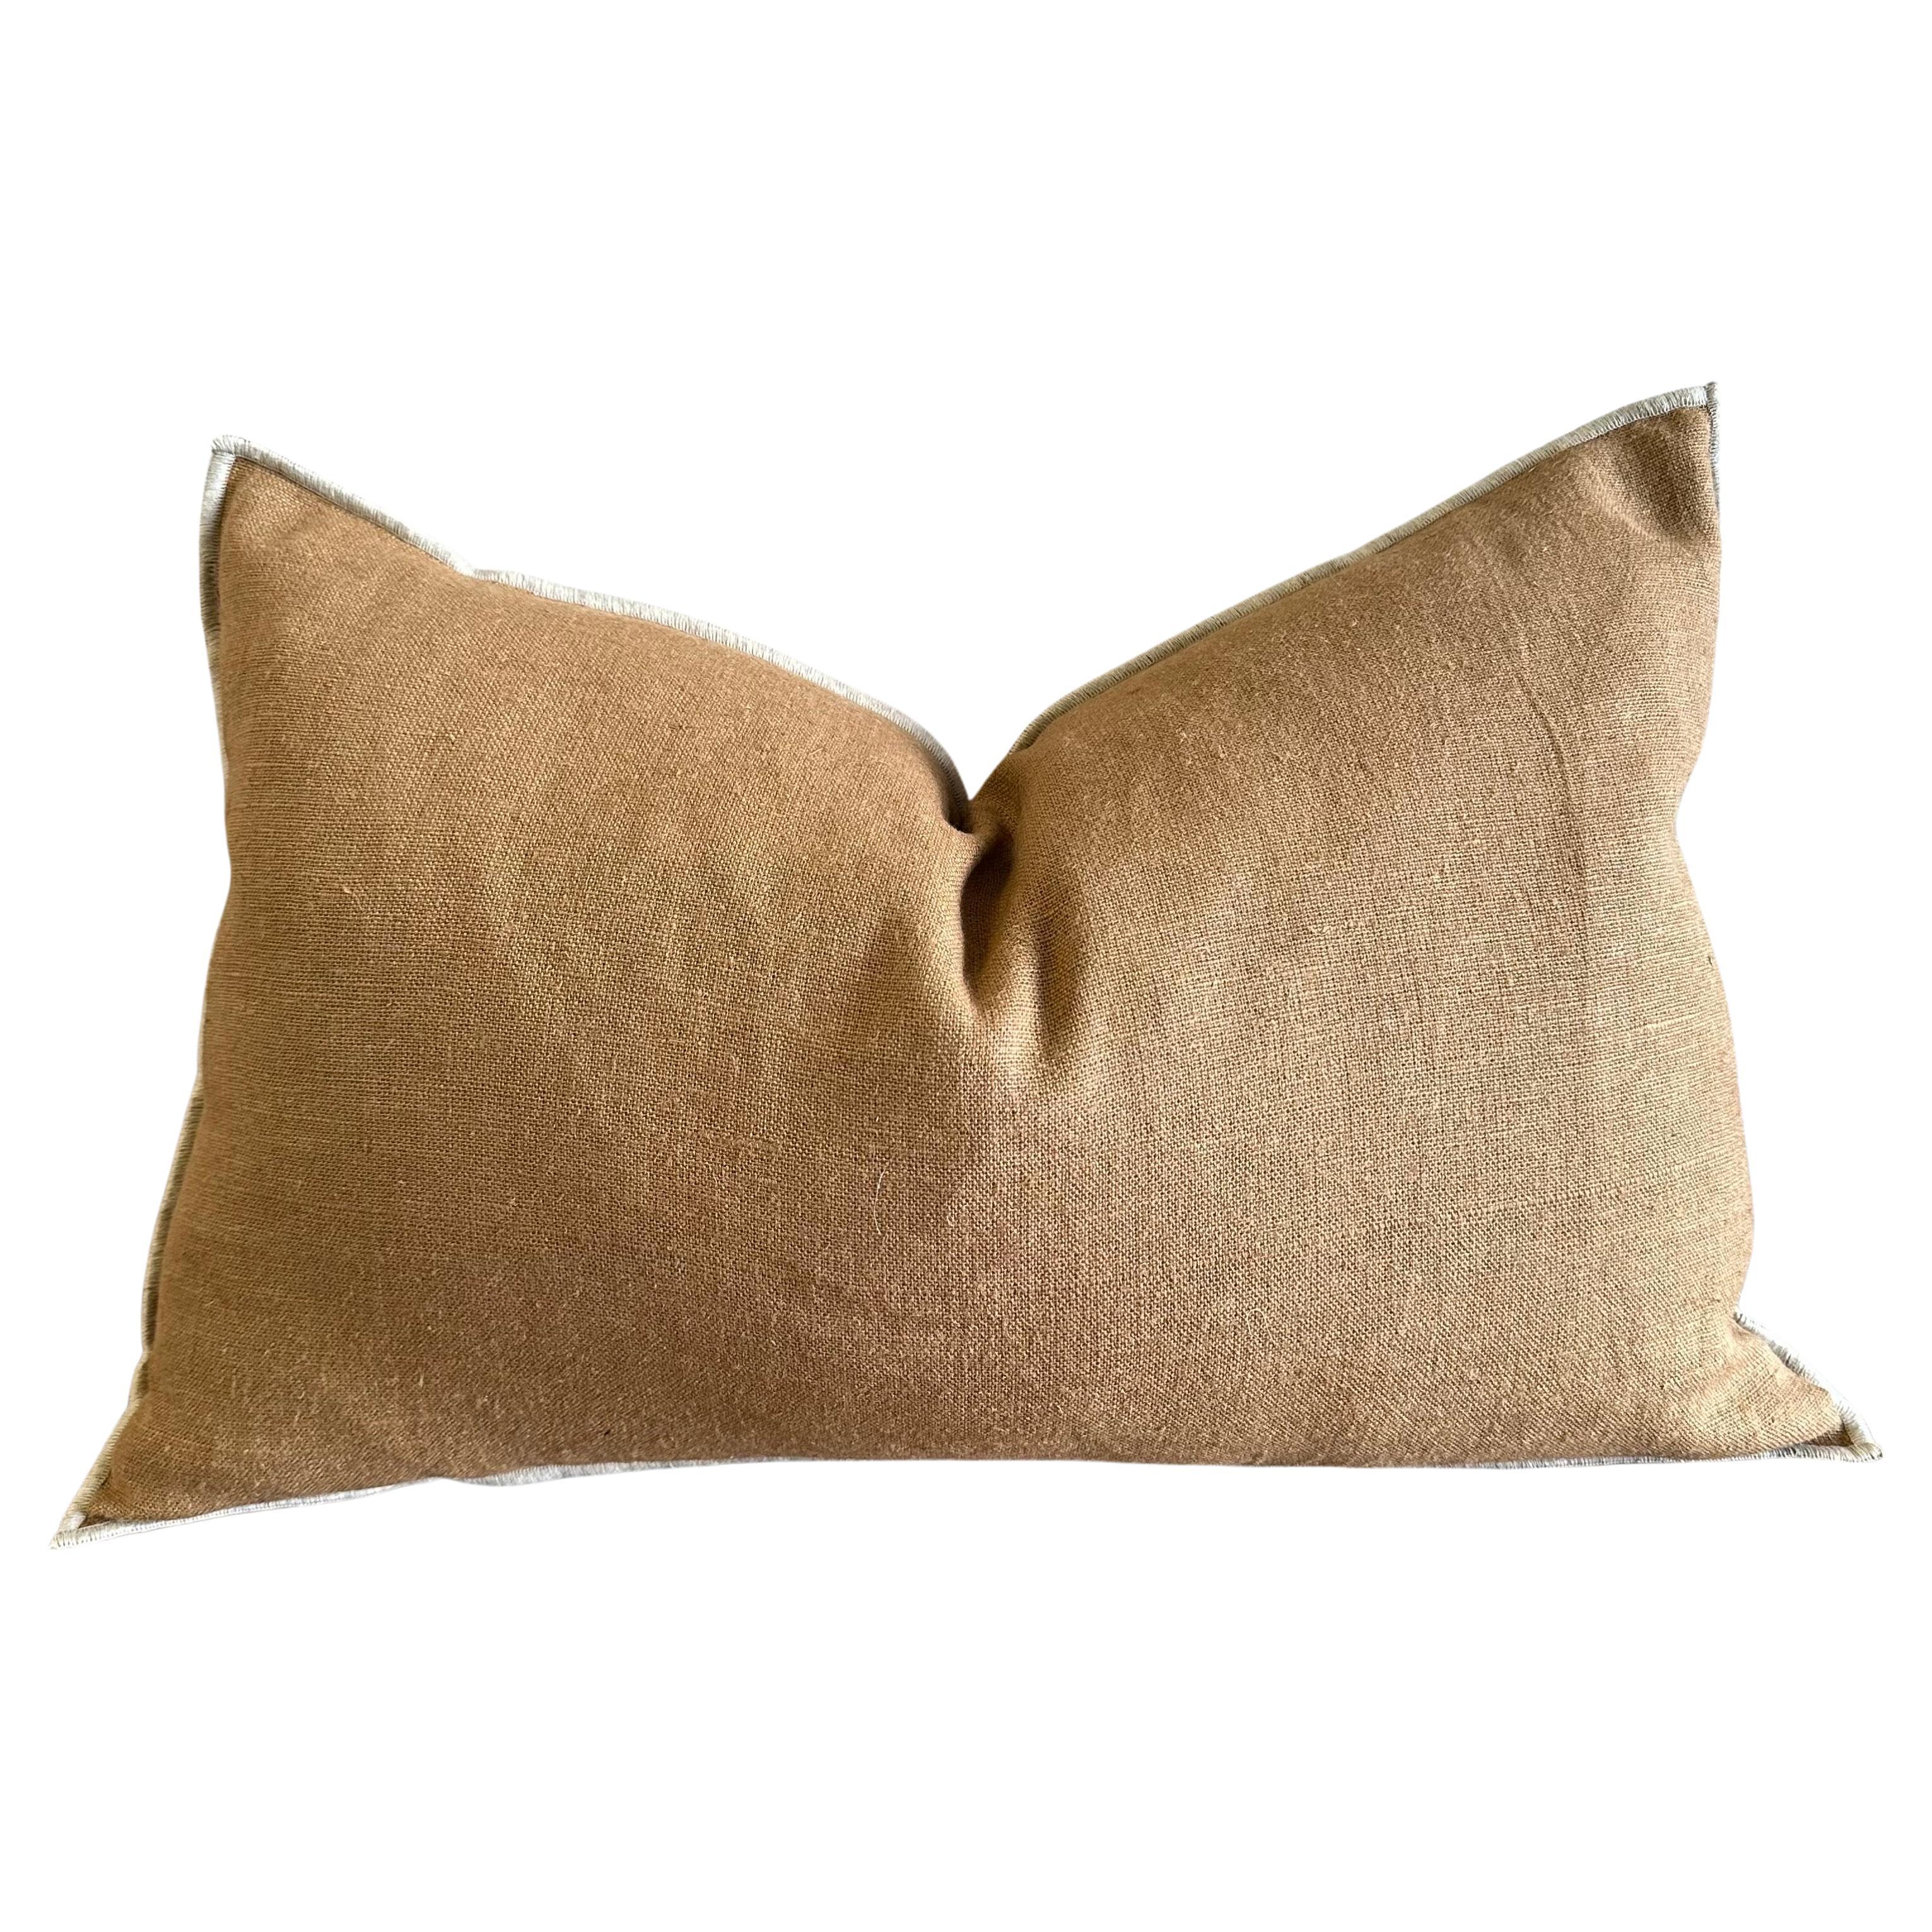 French Flax Linen Lumbar Pillow in Tabac